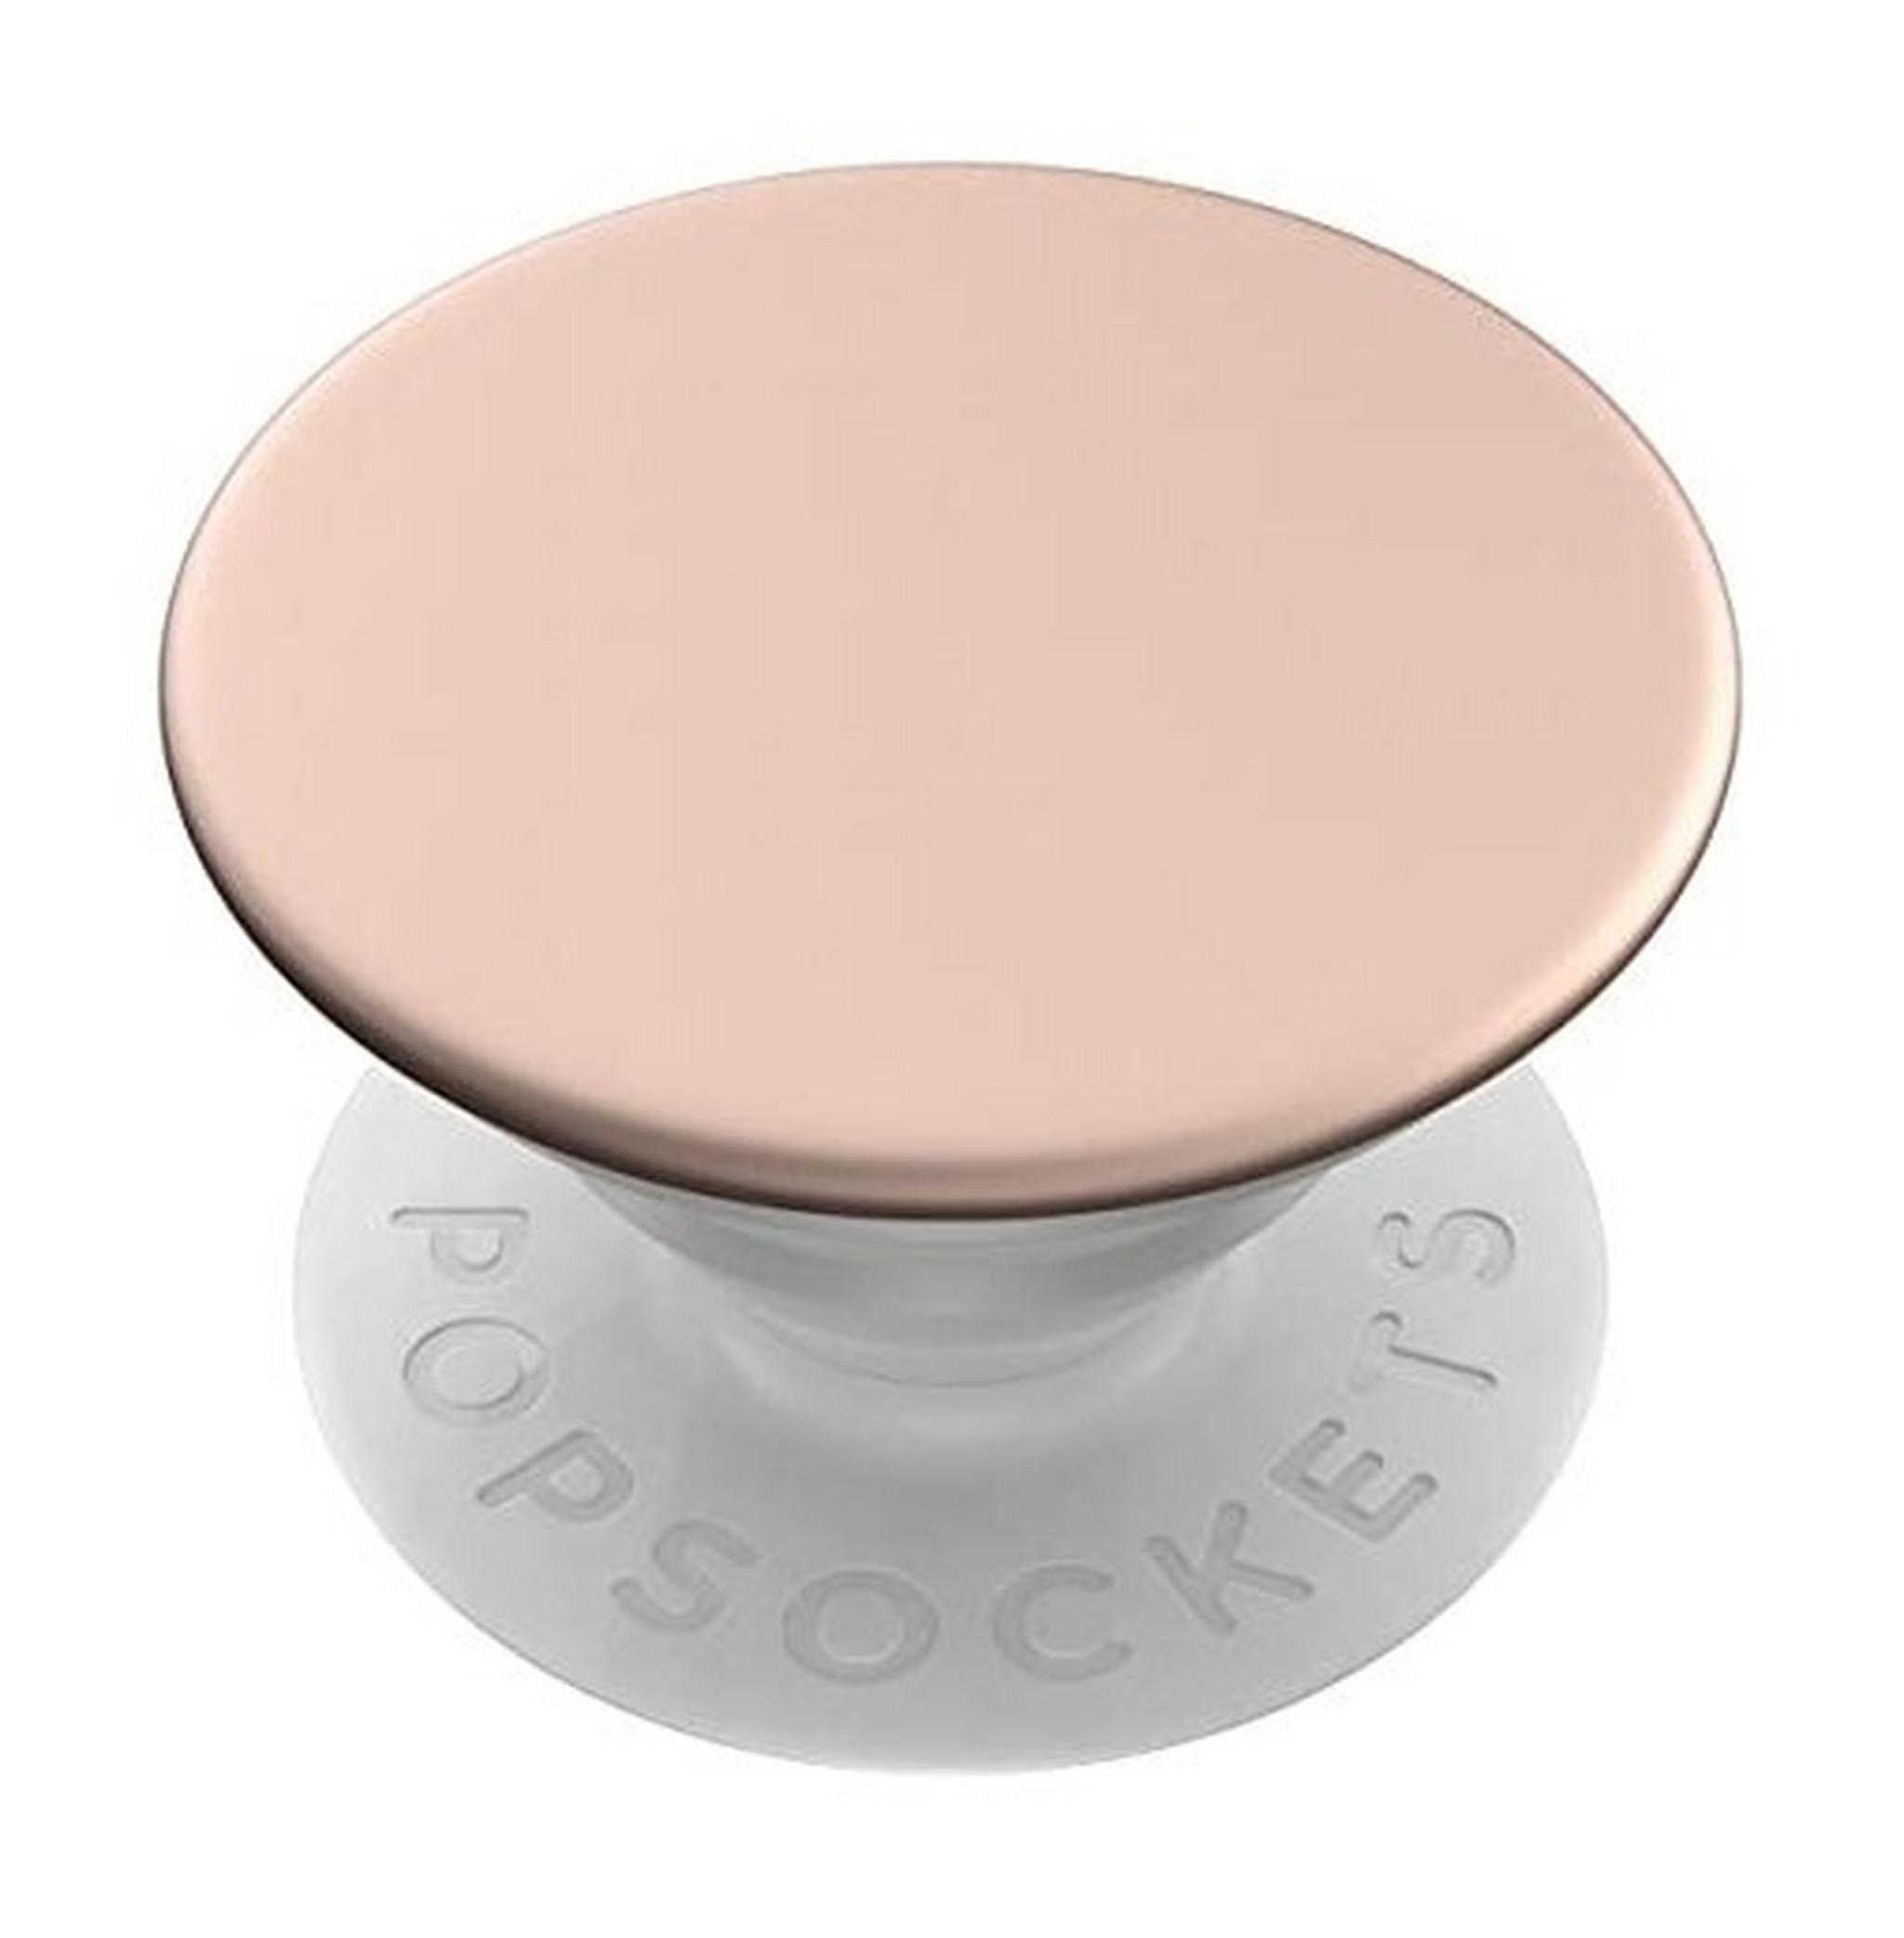 Popsocket Phone Stand and Grip - Metalic Rosegold